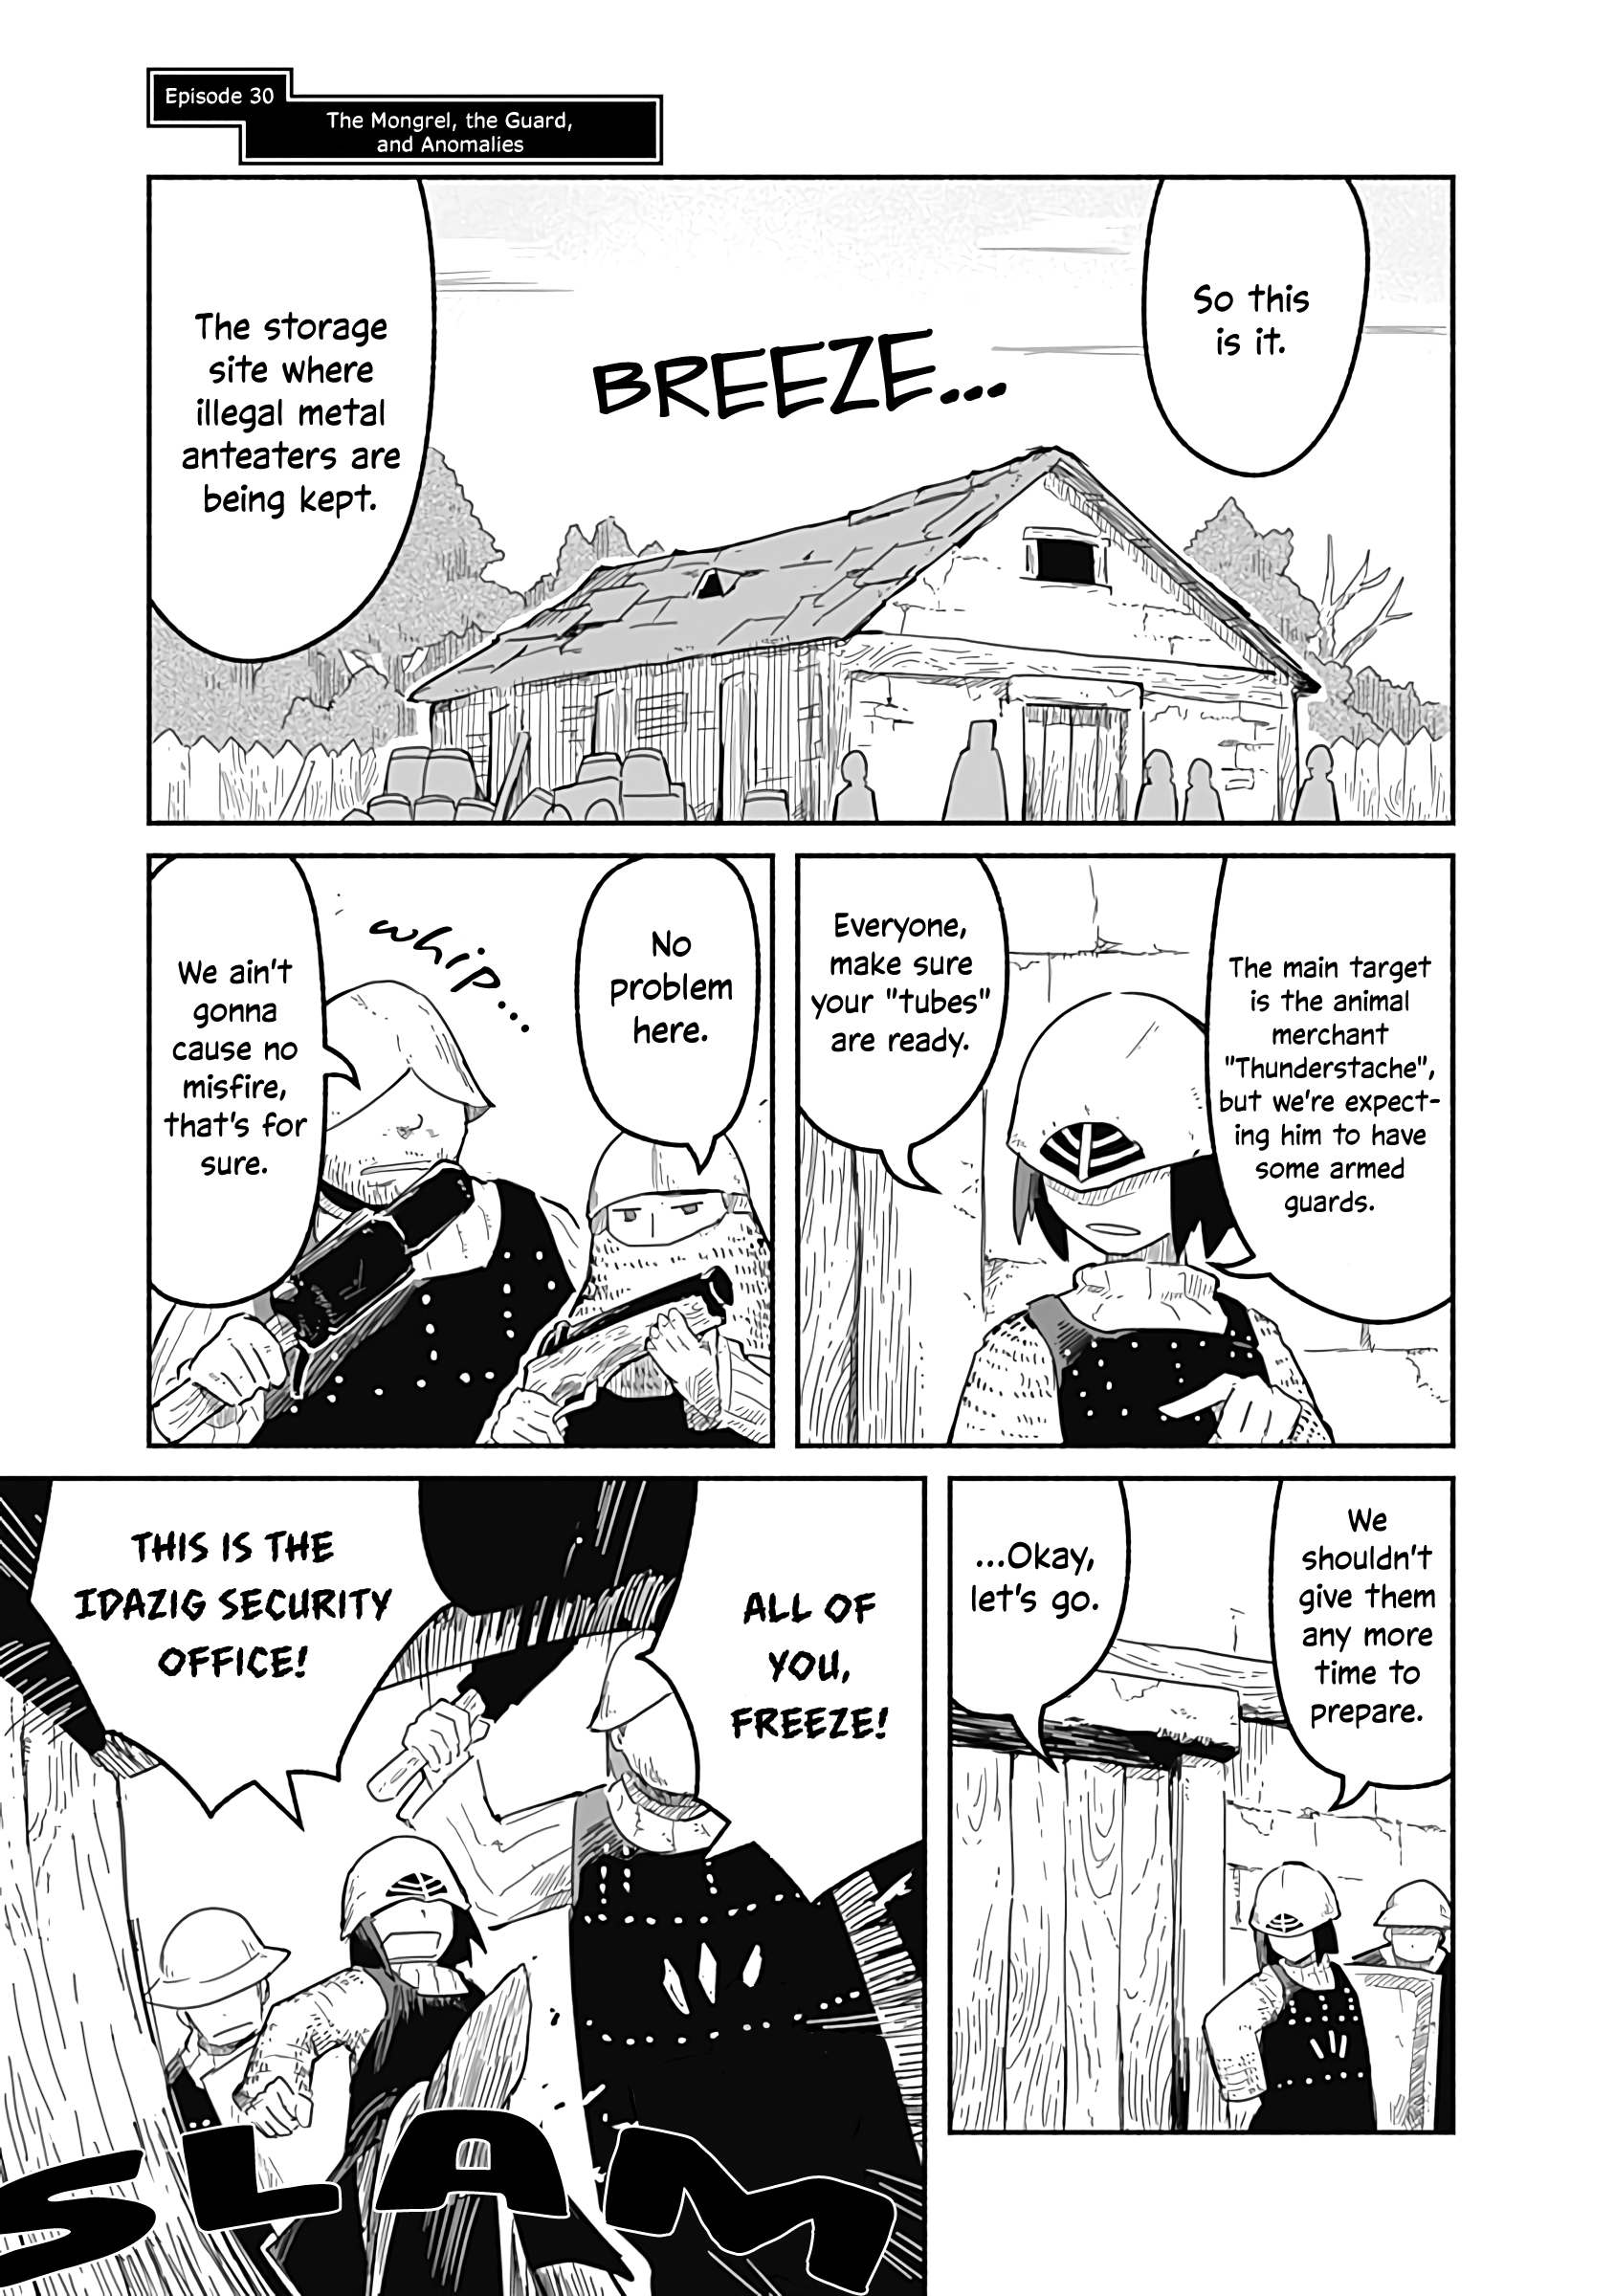 The Dragon, The Hero, And The Courier Vol.5 Chapter 30: The Mongrel, The Guard, And Anomalies - Picture 2